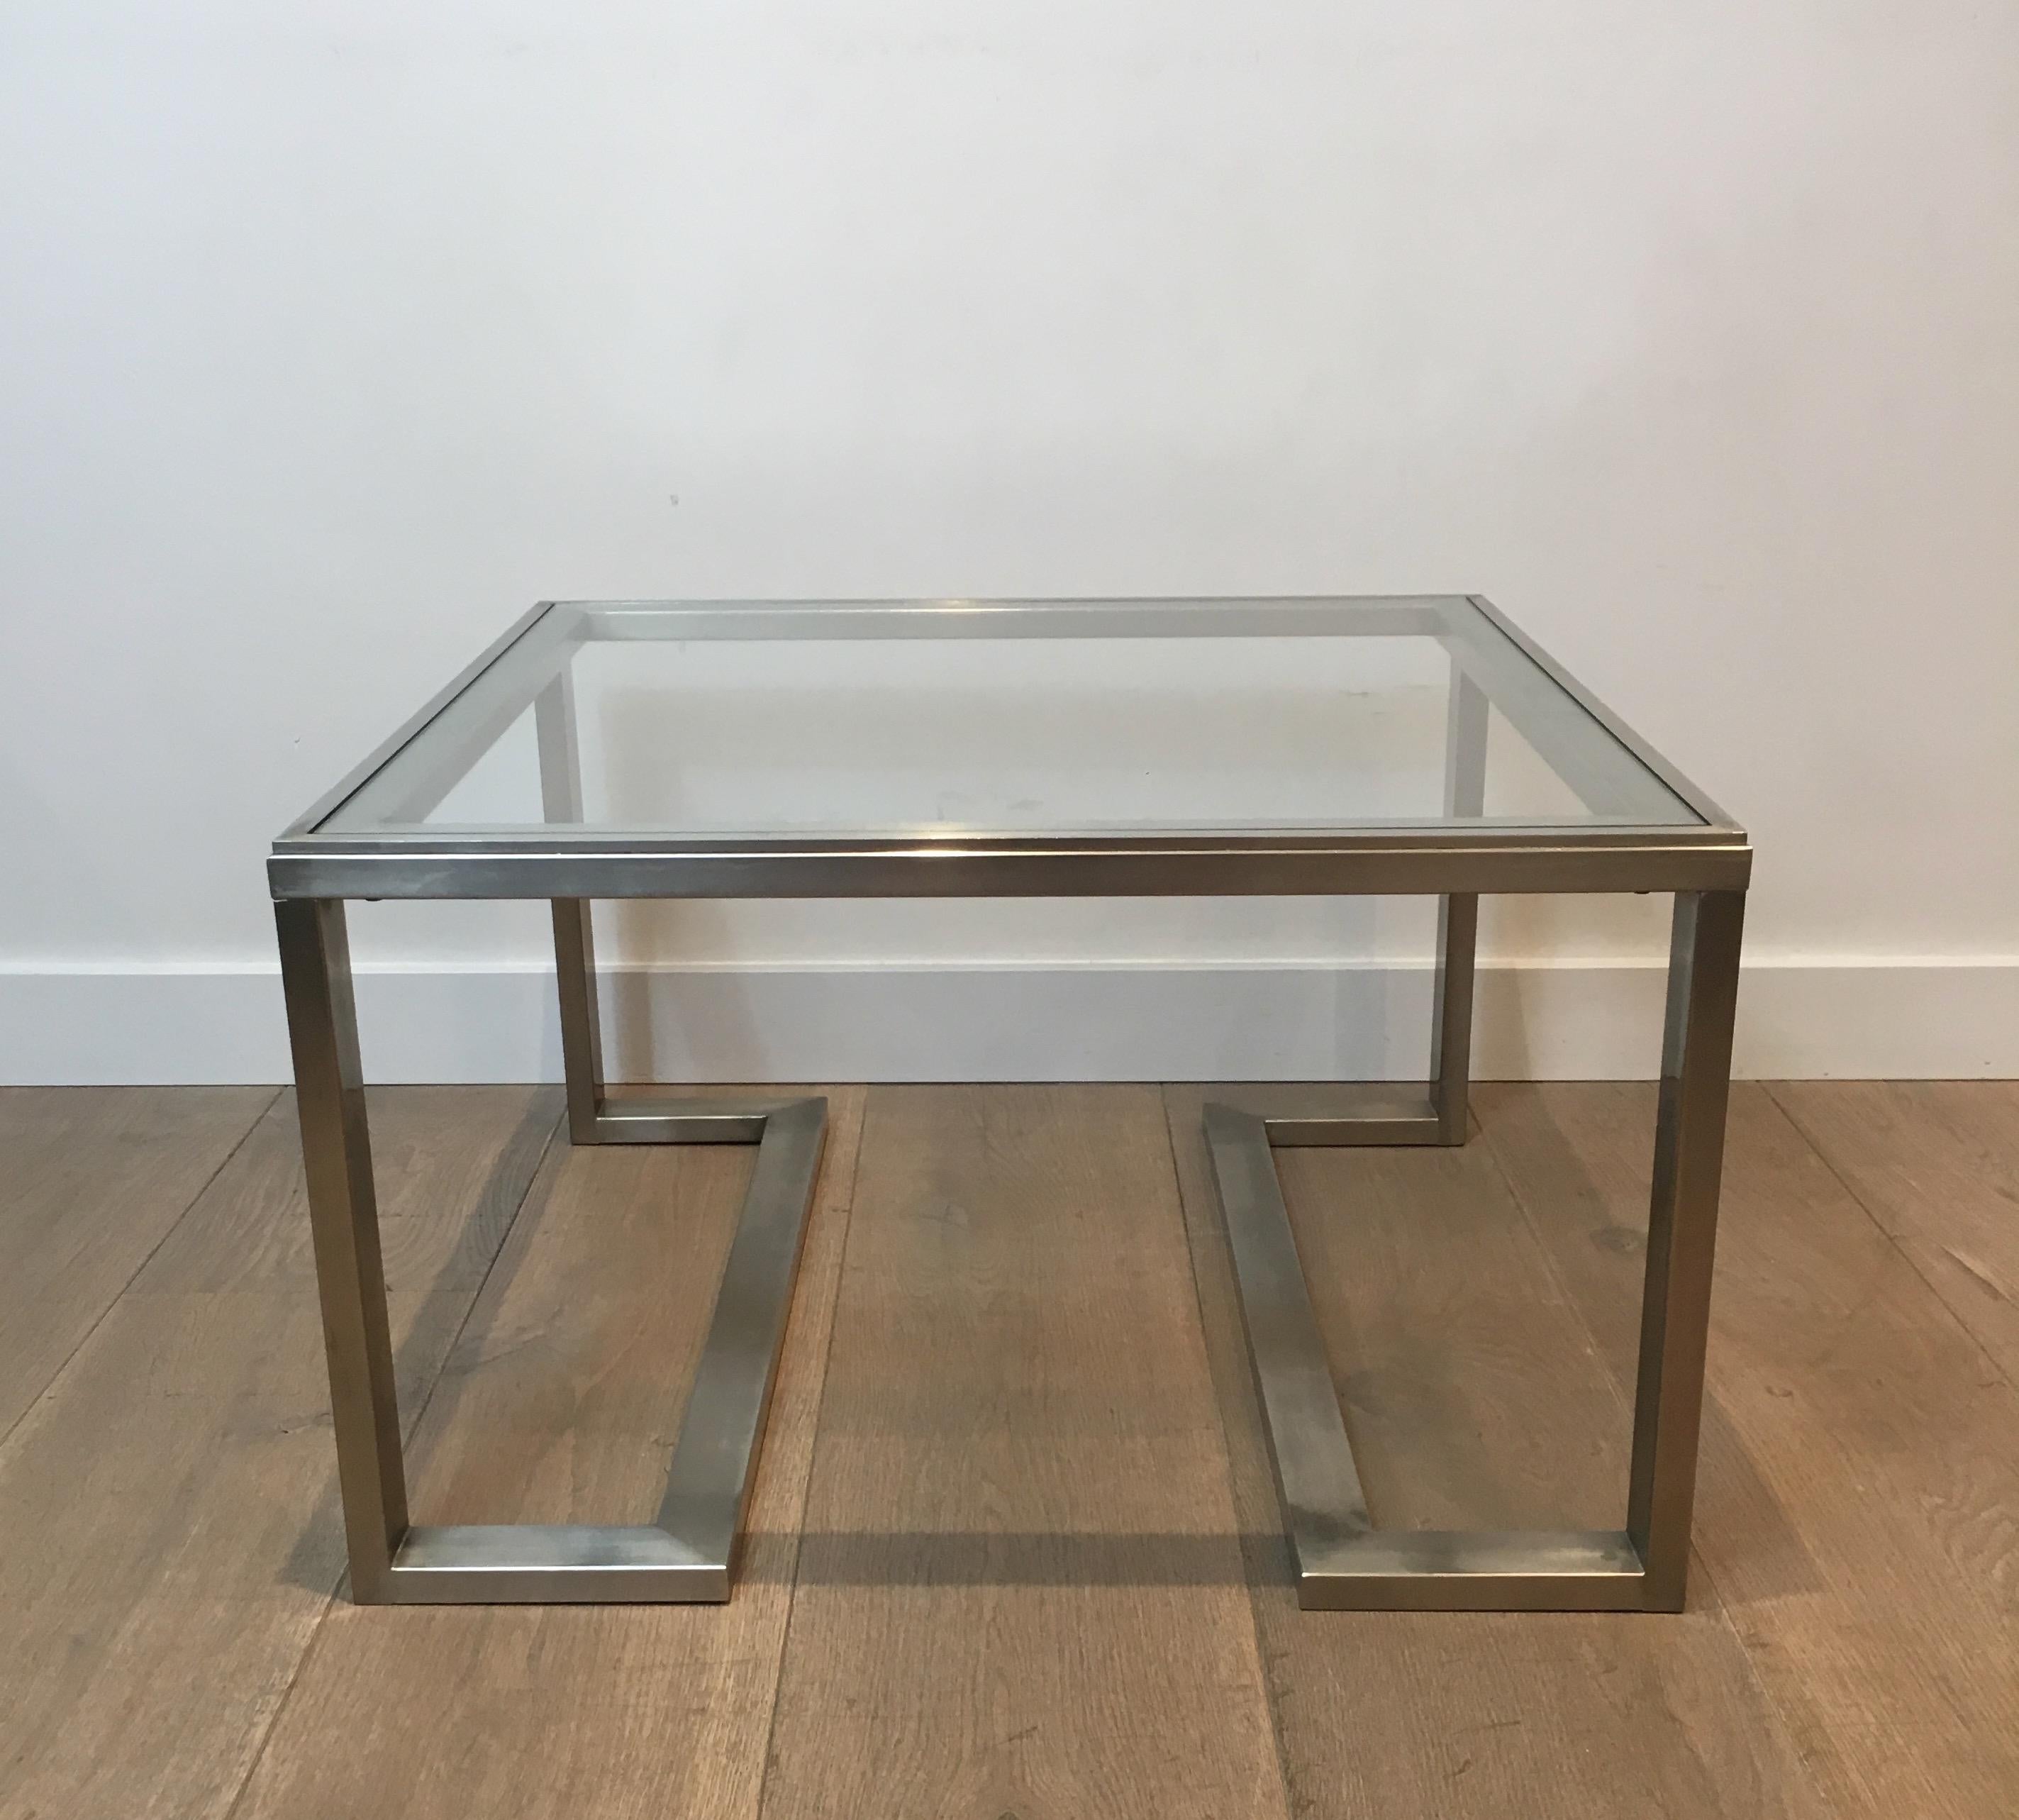 Pair of Design Brushed Steel Side Tables, French, circa 1970 For Sale 2